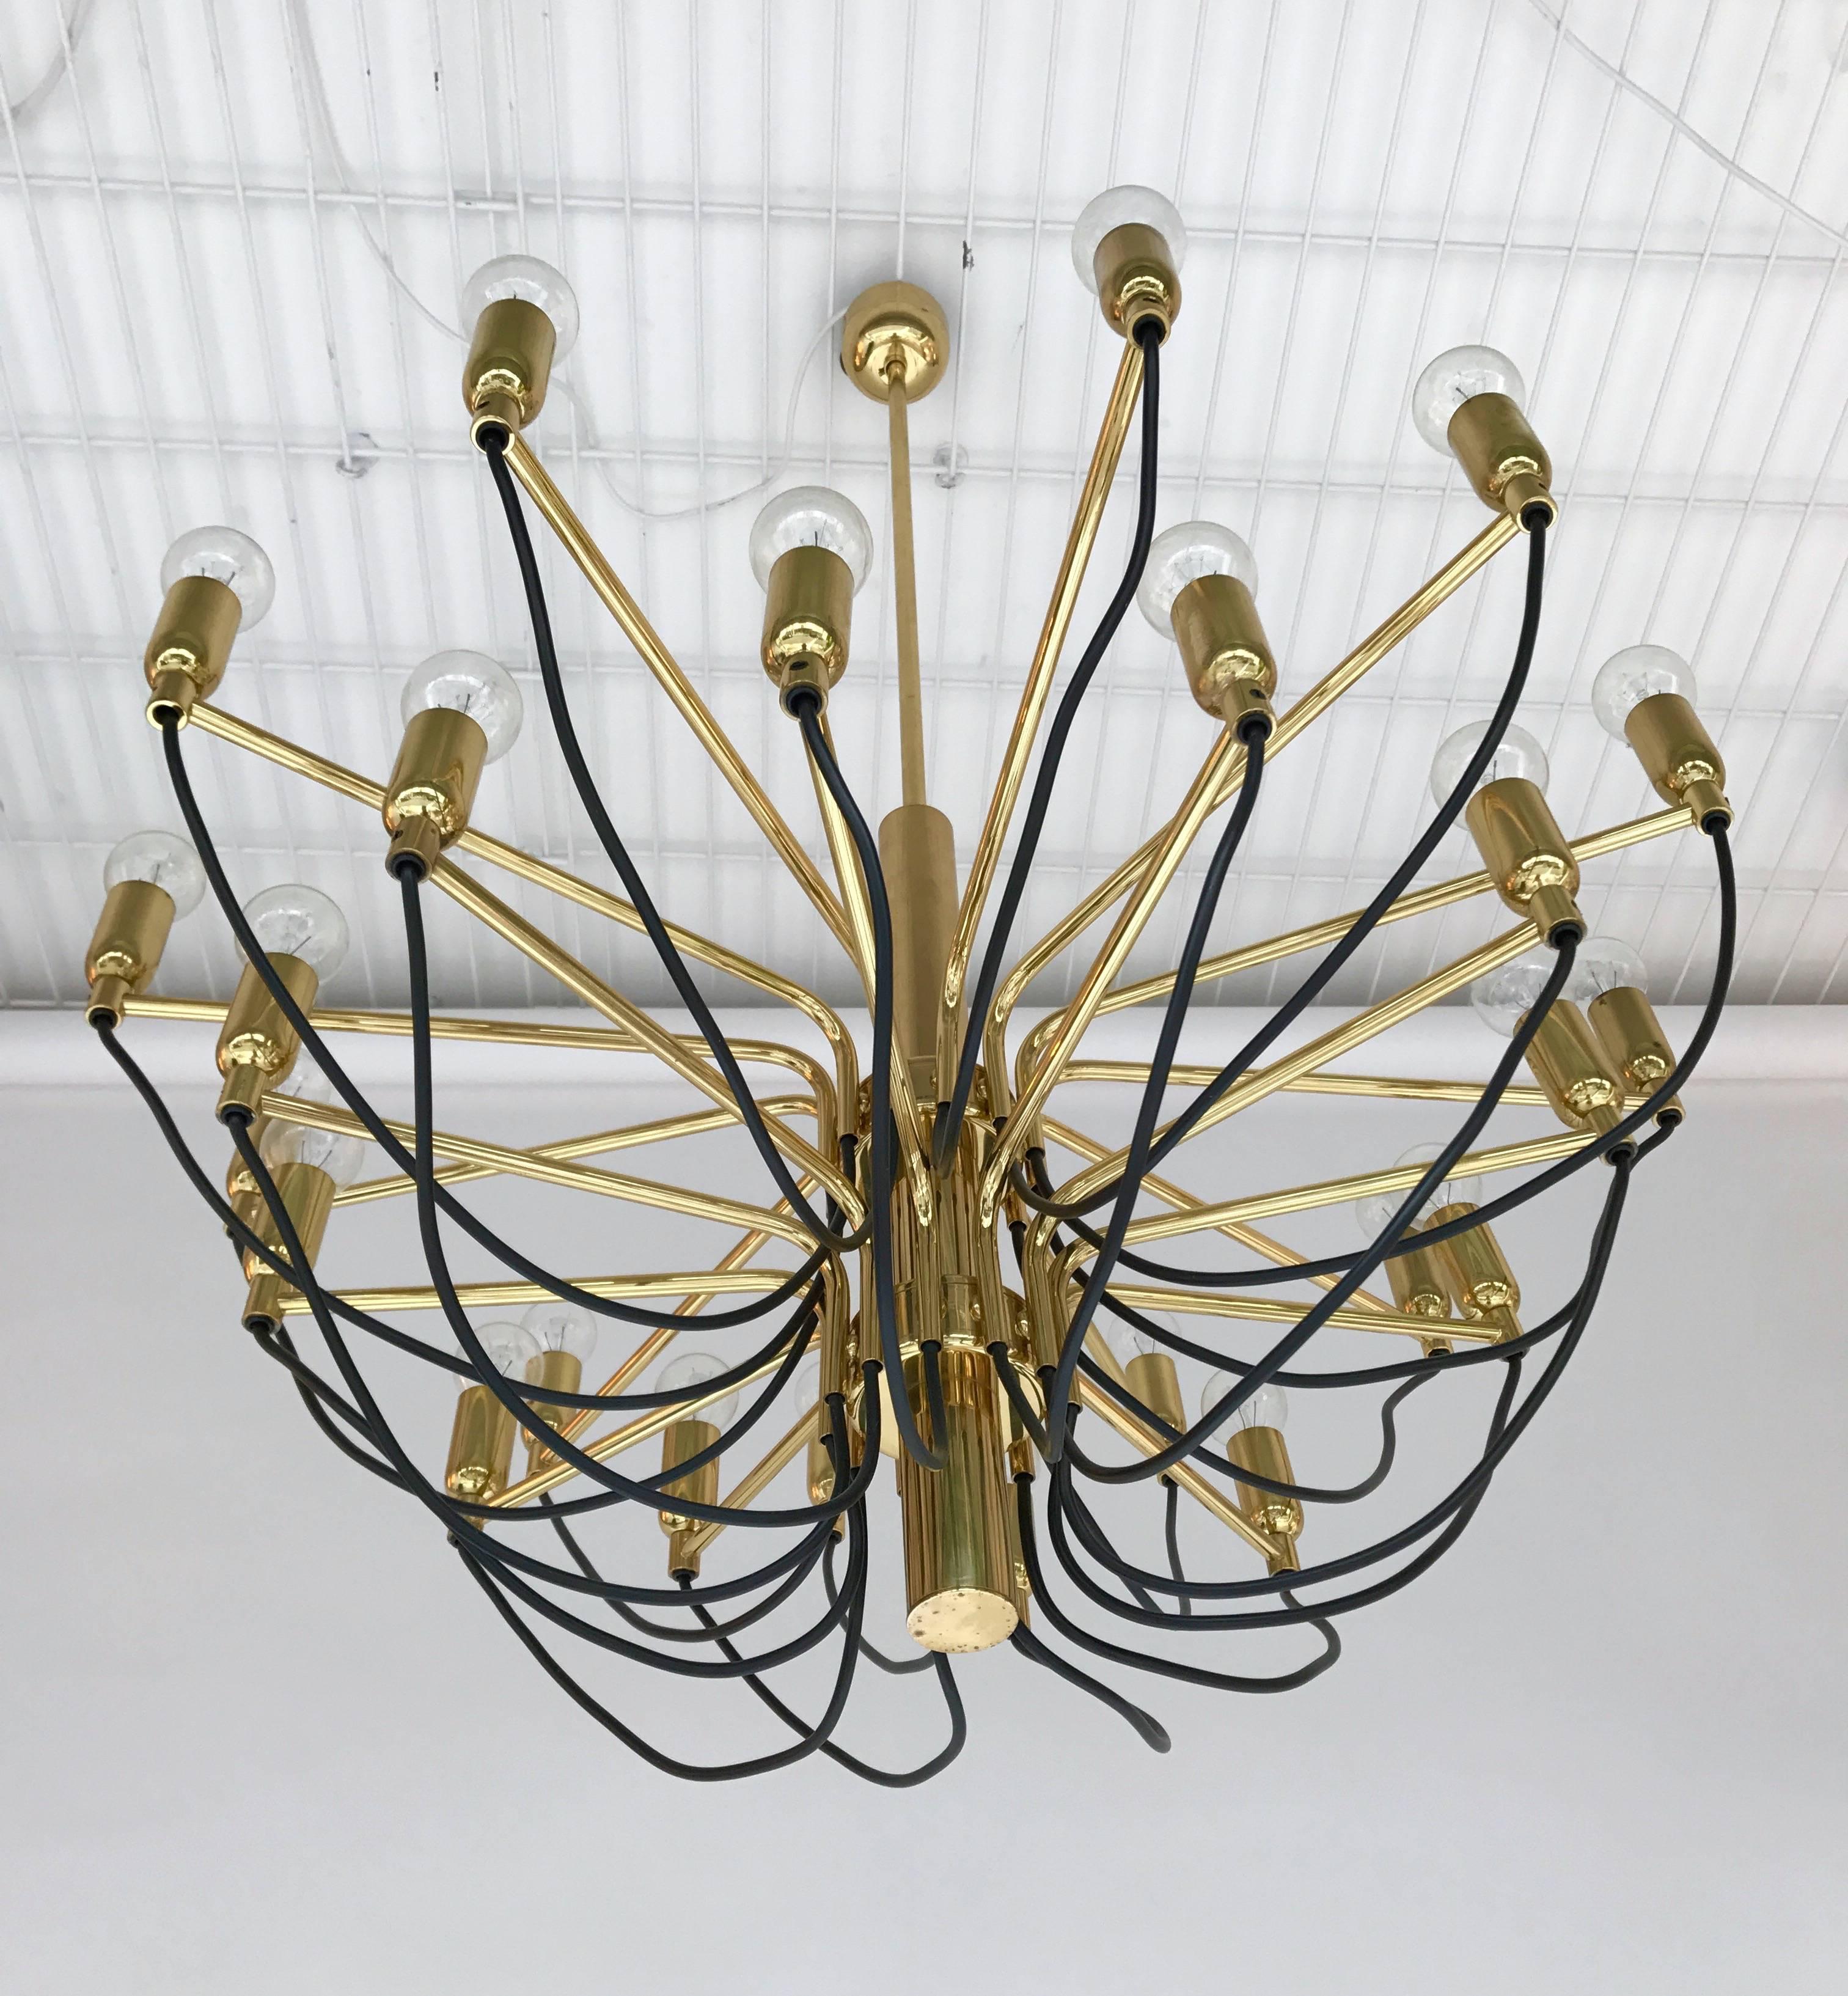 Chandelier or ceiling pendant light from the editor Staff Leuchten Germany, full brass. Height easily adjustable. Famous manufacture like Sarfatti, Sciolari, Reggiani. The chandelier can be prepare for E12 bulbs the UK/US norm.
